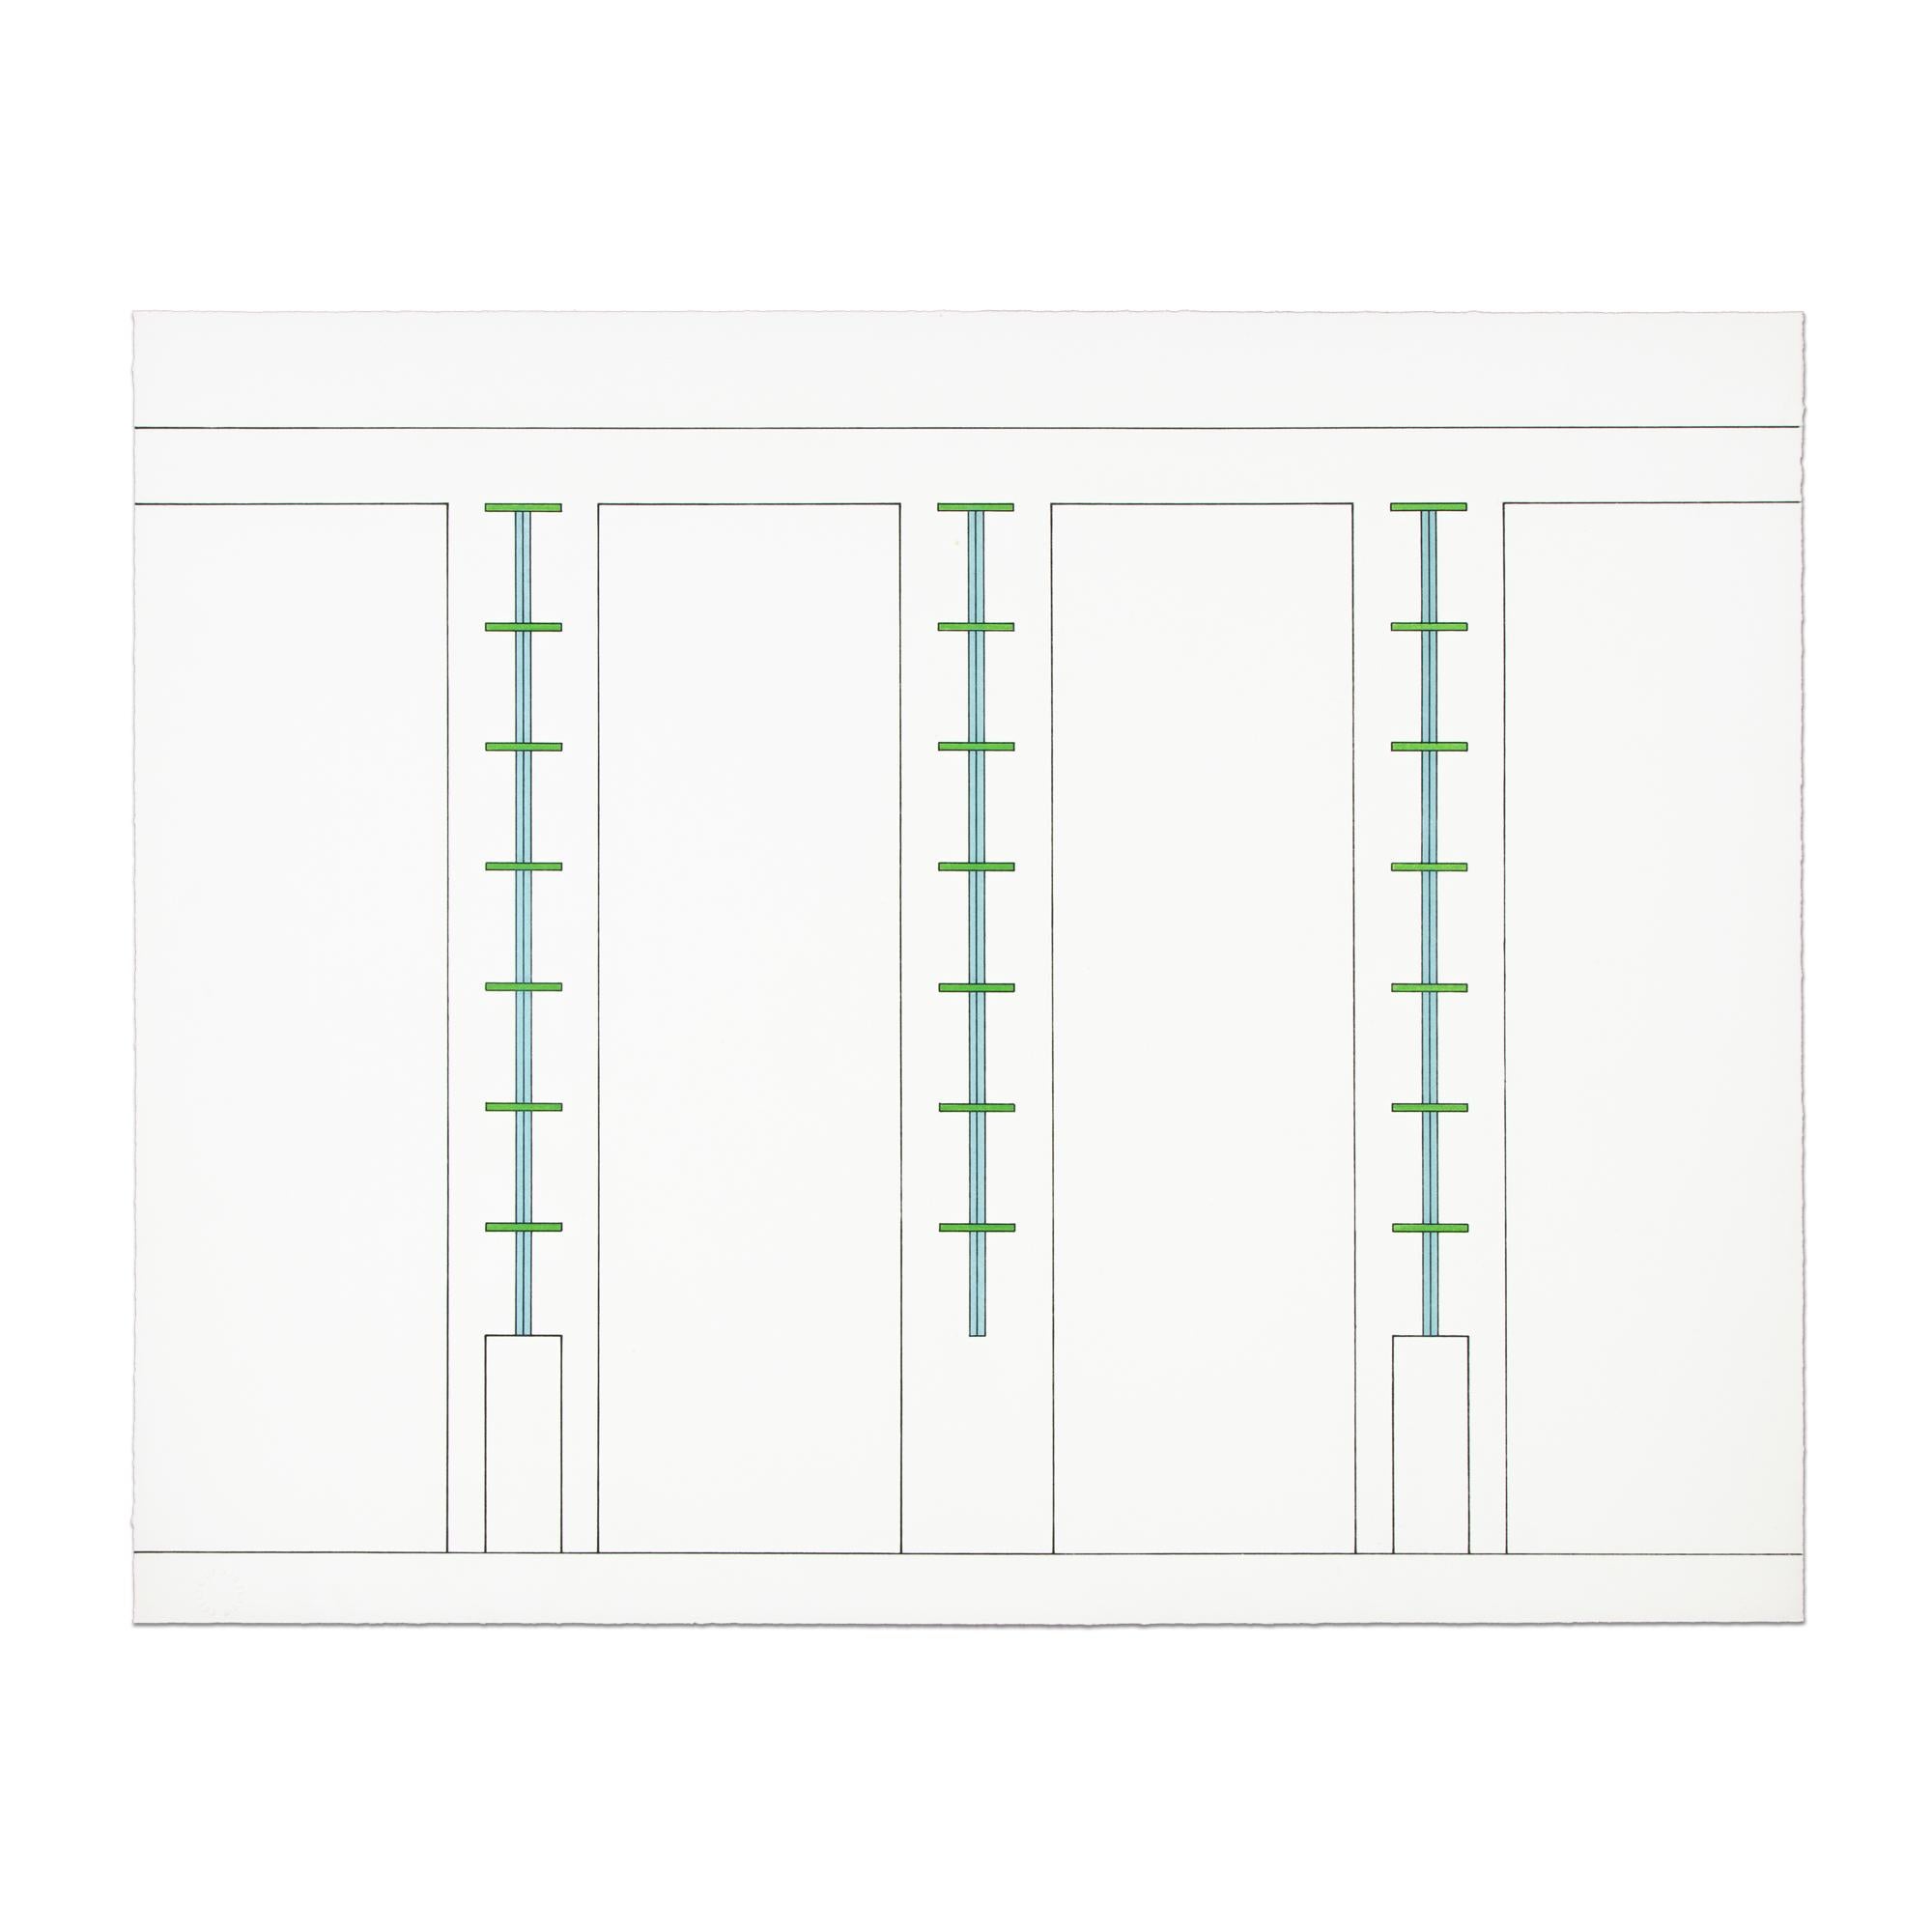 Dan Flavin (American, 1933-1996)
Untitled (Sheet 10 from Projects 1963-1995), 1997
Medium: Etching and aquatint on rag paper
Dimensions: 52.1 × 66 cm (20 1/2 × 26 in)
Edition of 36: Estate signed and numbered by Stephen Flavin (Dan Flavin’s son),